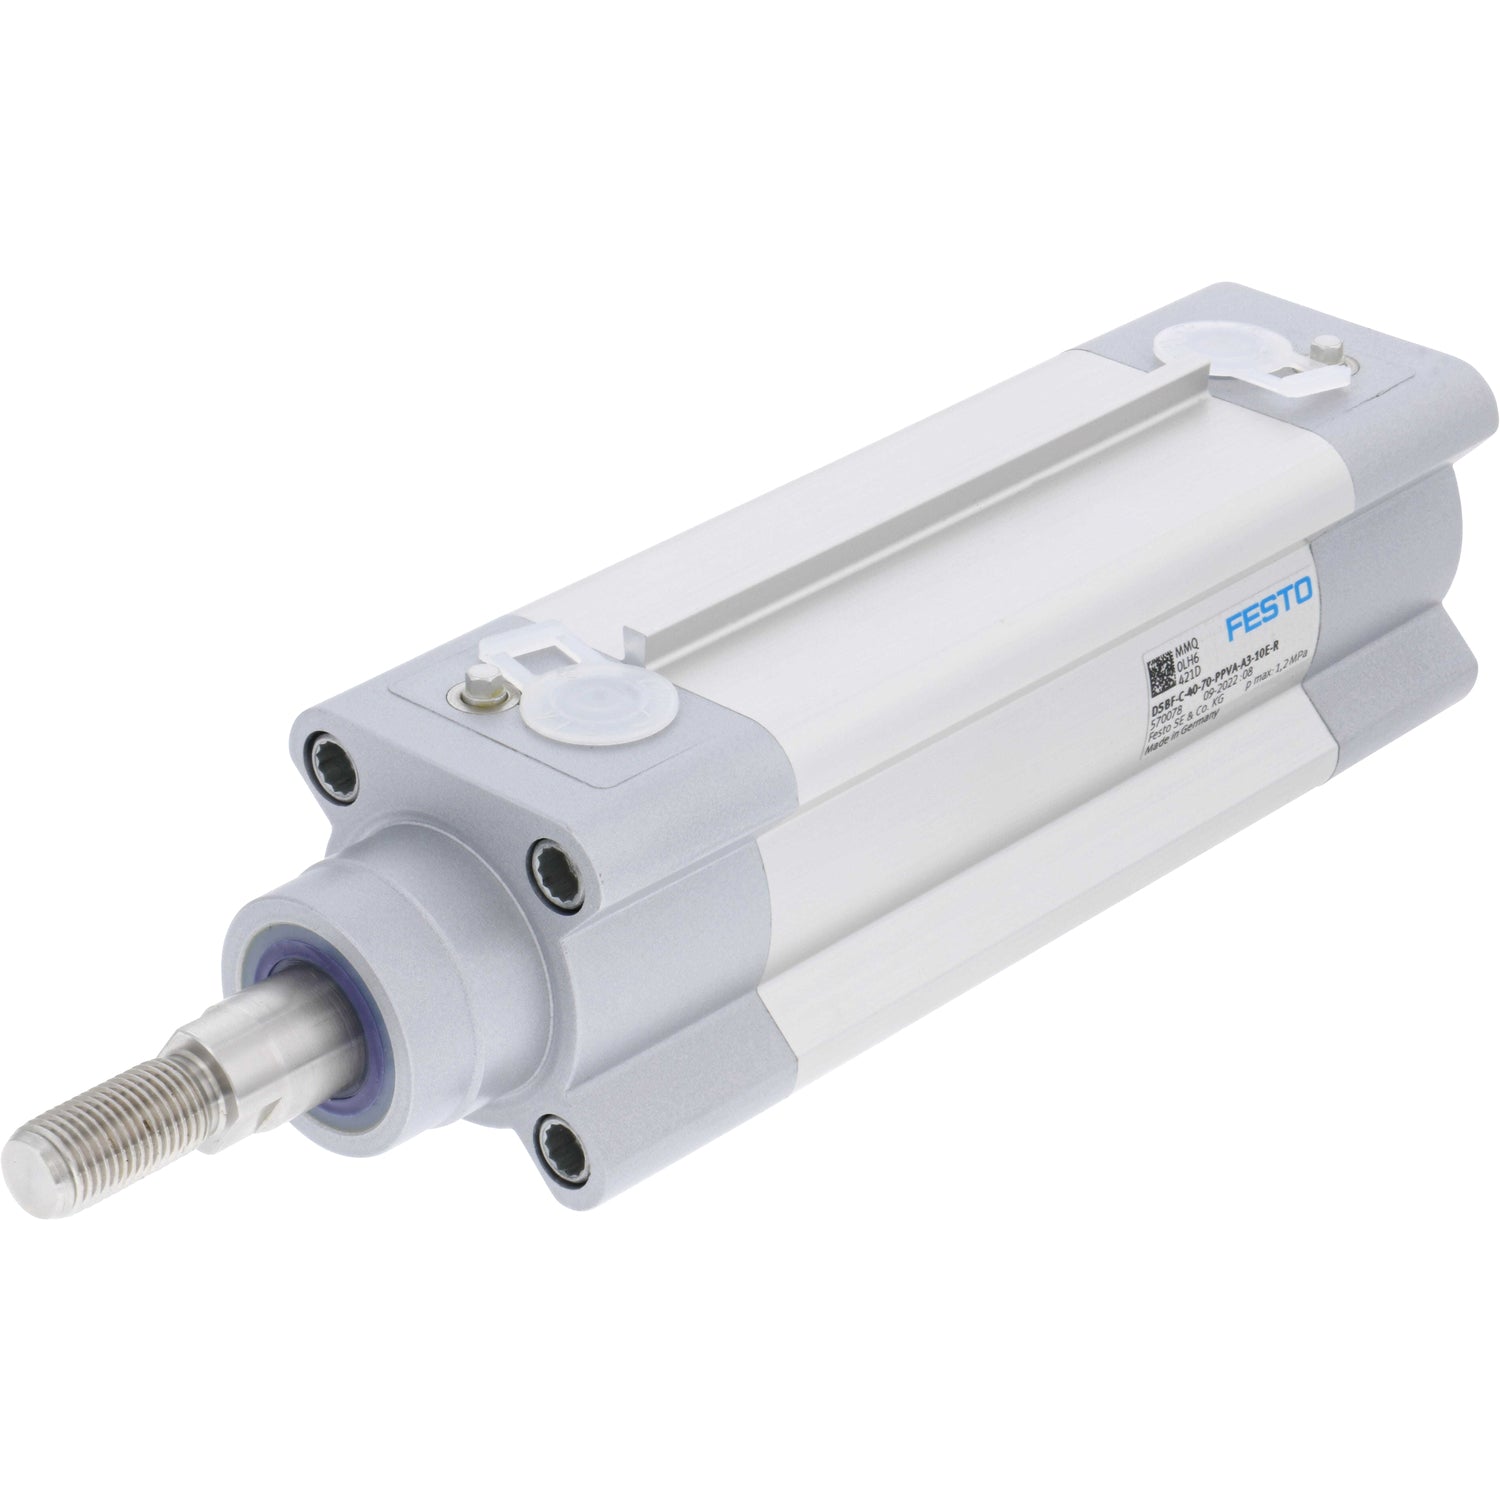 Pneumatic cylinder on white background. Cylinder's threaded cylinder rod and seal are shown. 570078 DSBF-C-40-70-PPVA-A3-10E-R